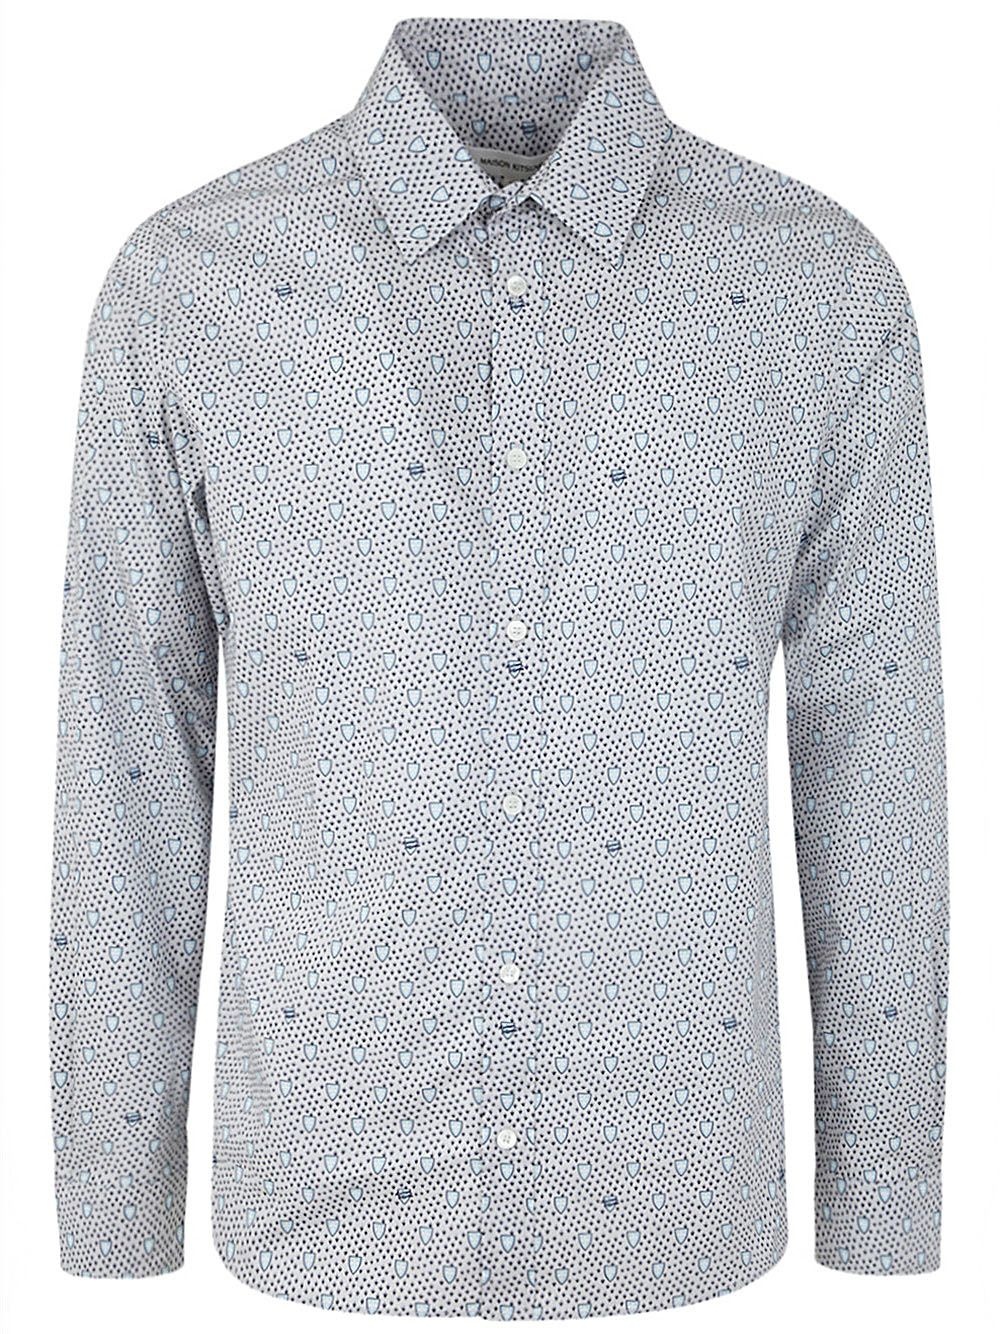 CLASSIC SHIRT IN SHIELD PRINTED COTTON - 1